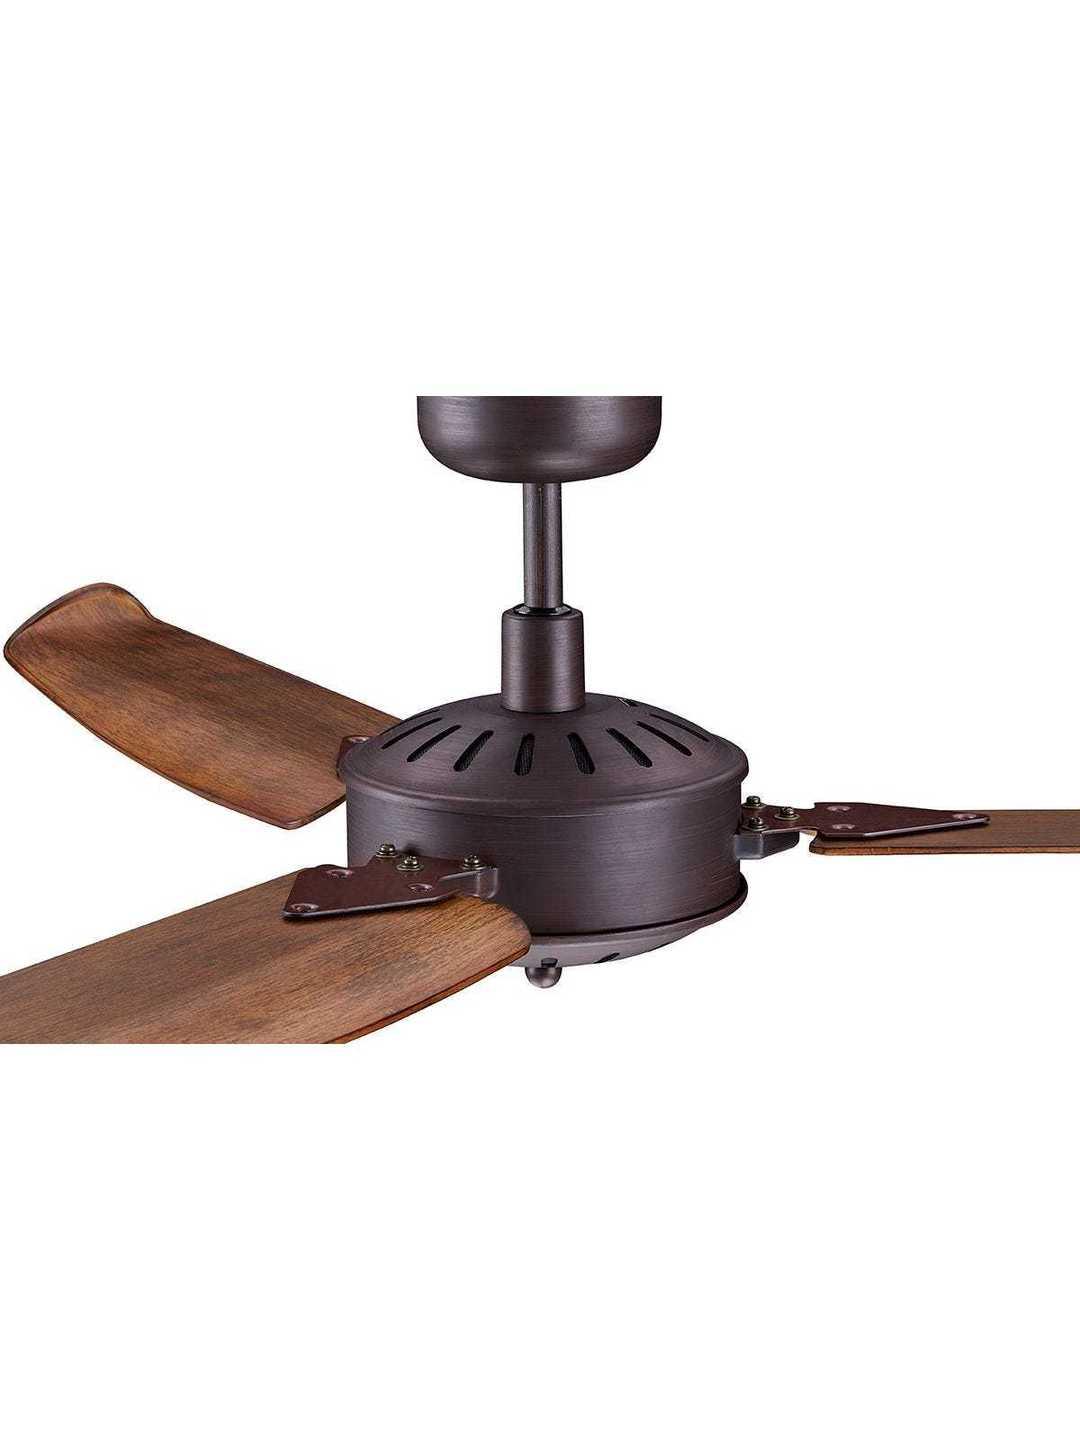 Steel Frame with ABS Blade Ceiling Fan - LV LIGHTING